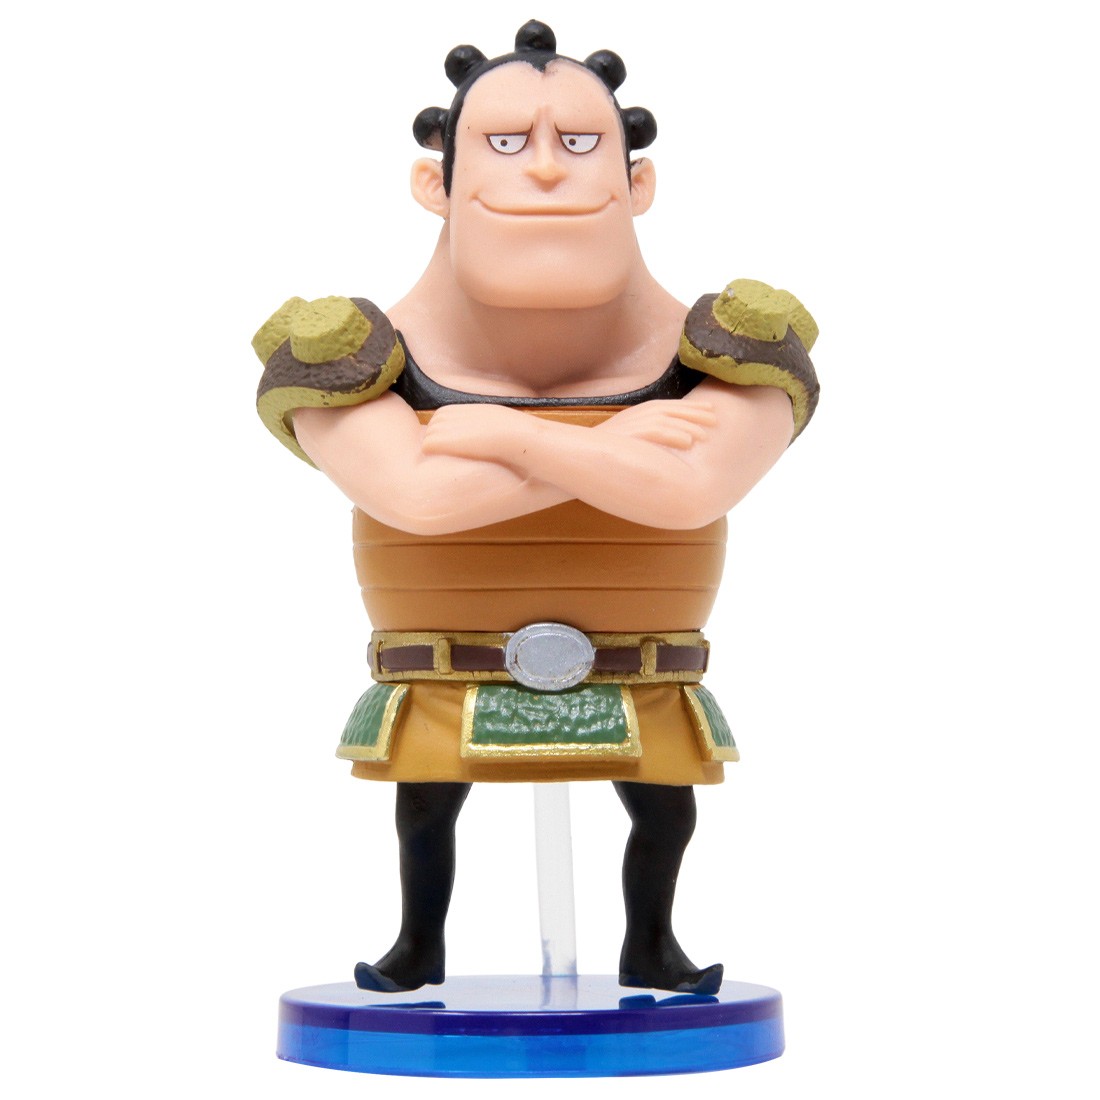 ZUNISHA World Collectable Figure One Piece TREASURE RALLY Ⅲ shipping from  Japan